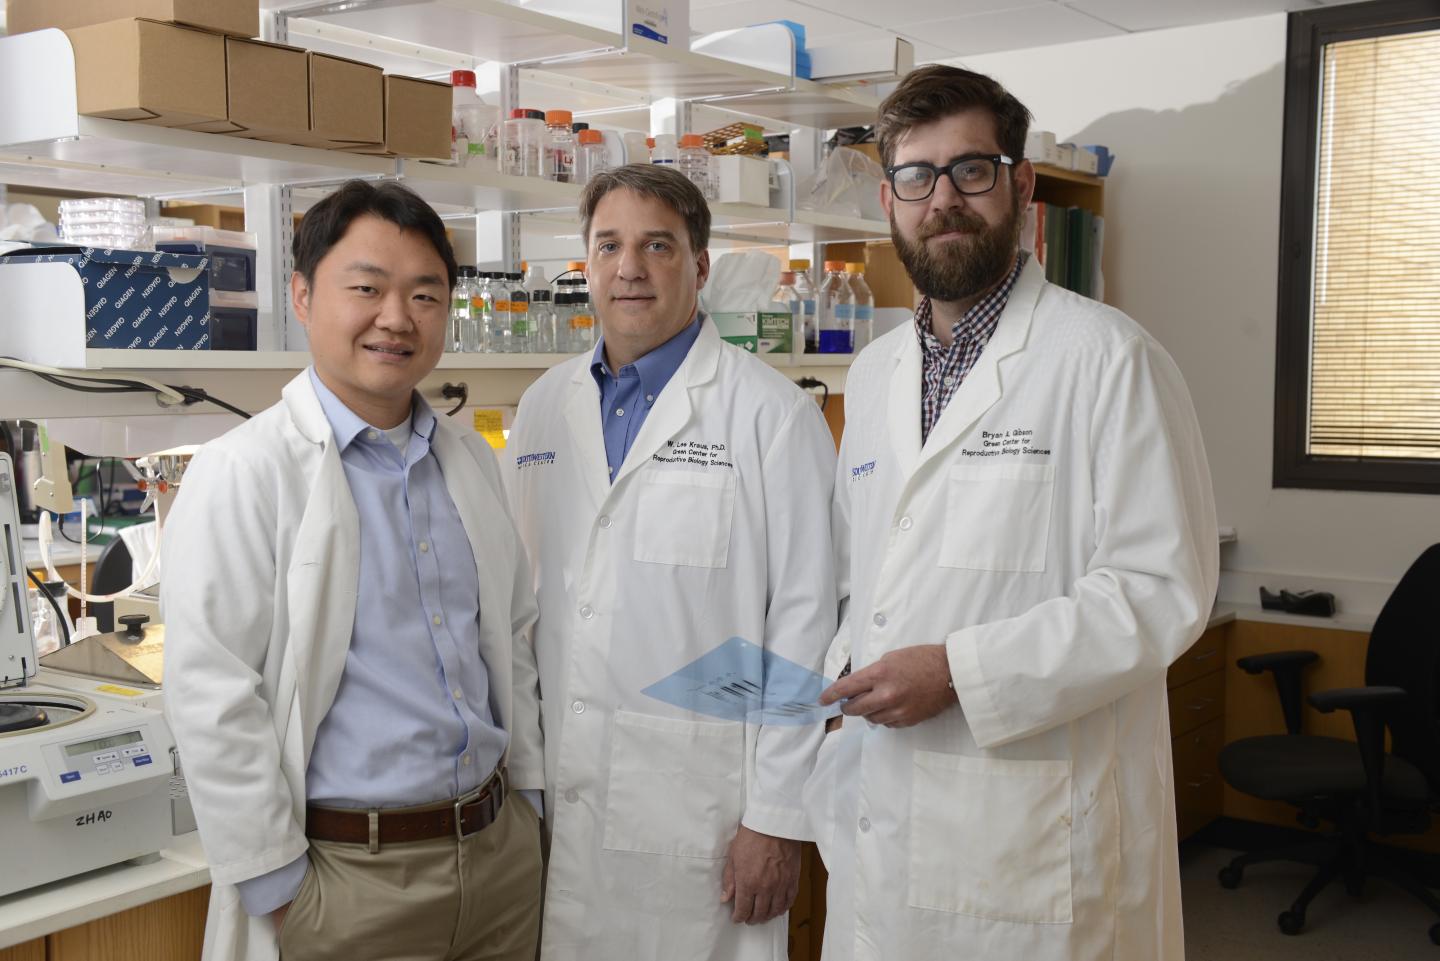 Dr. Yonghao Yu, Dr. W. Lee Kraus, and Dr. Bryan Gibson, UT Southwestern